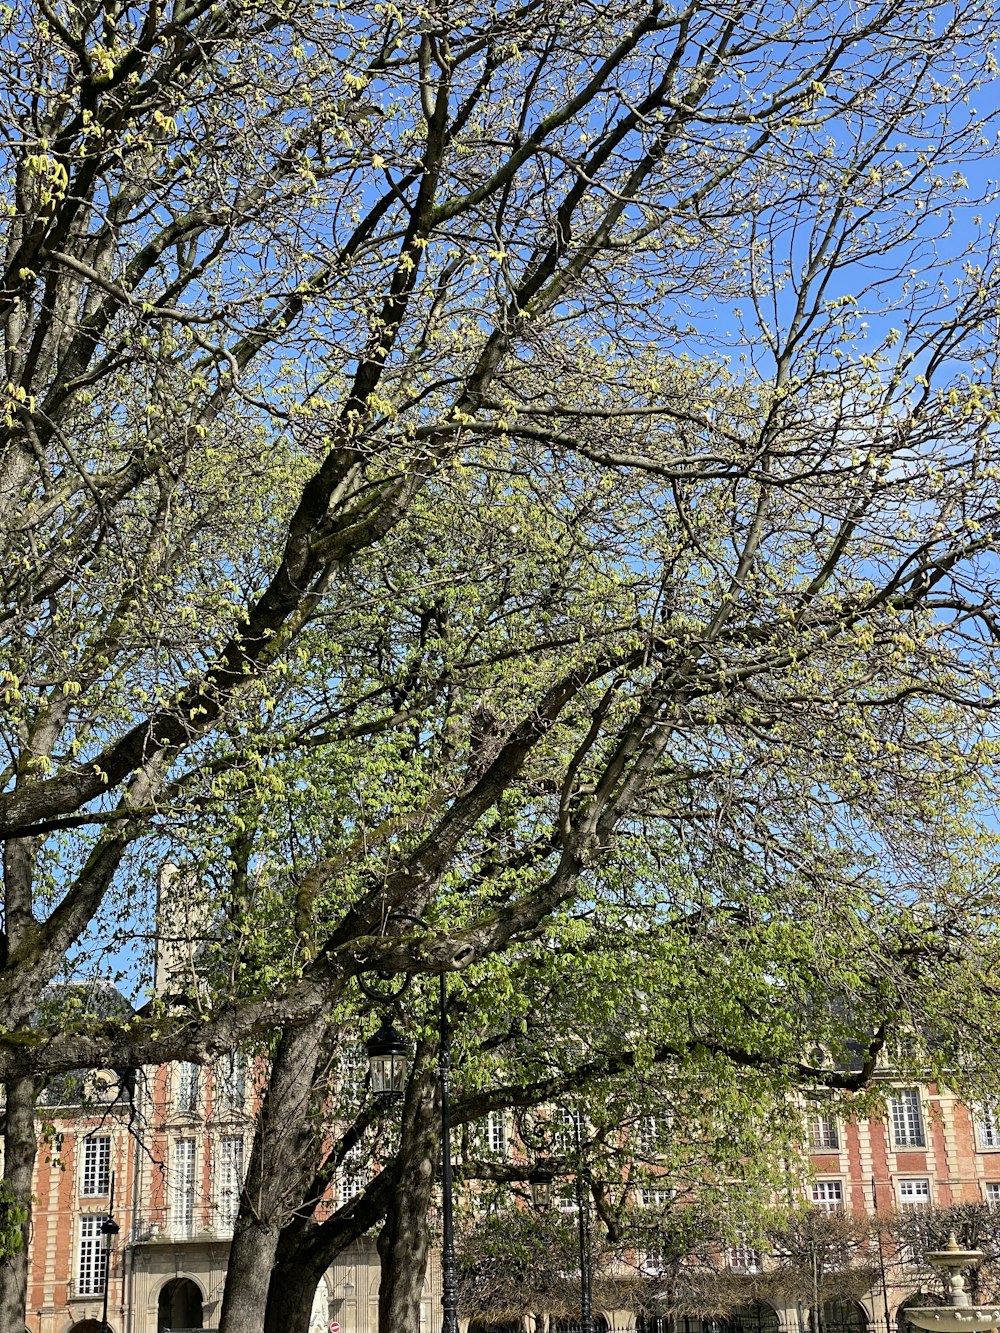 a park bench under a leafless tree in front of a building